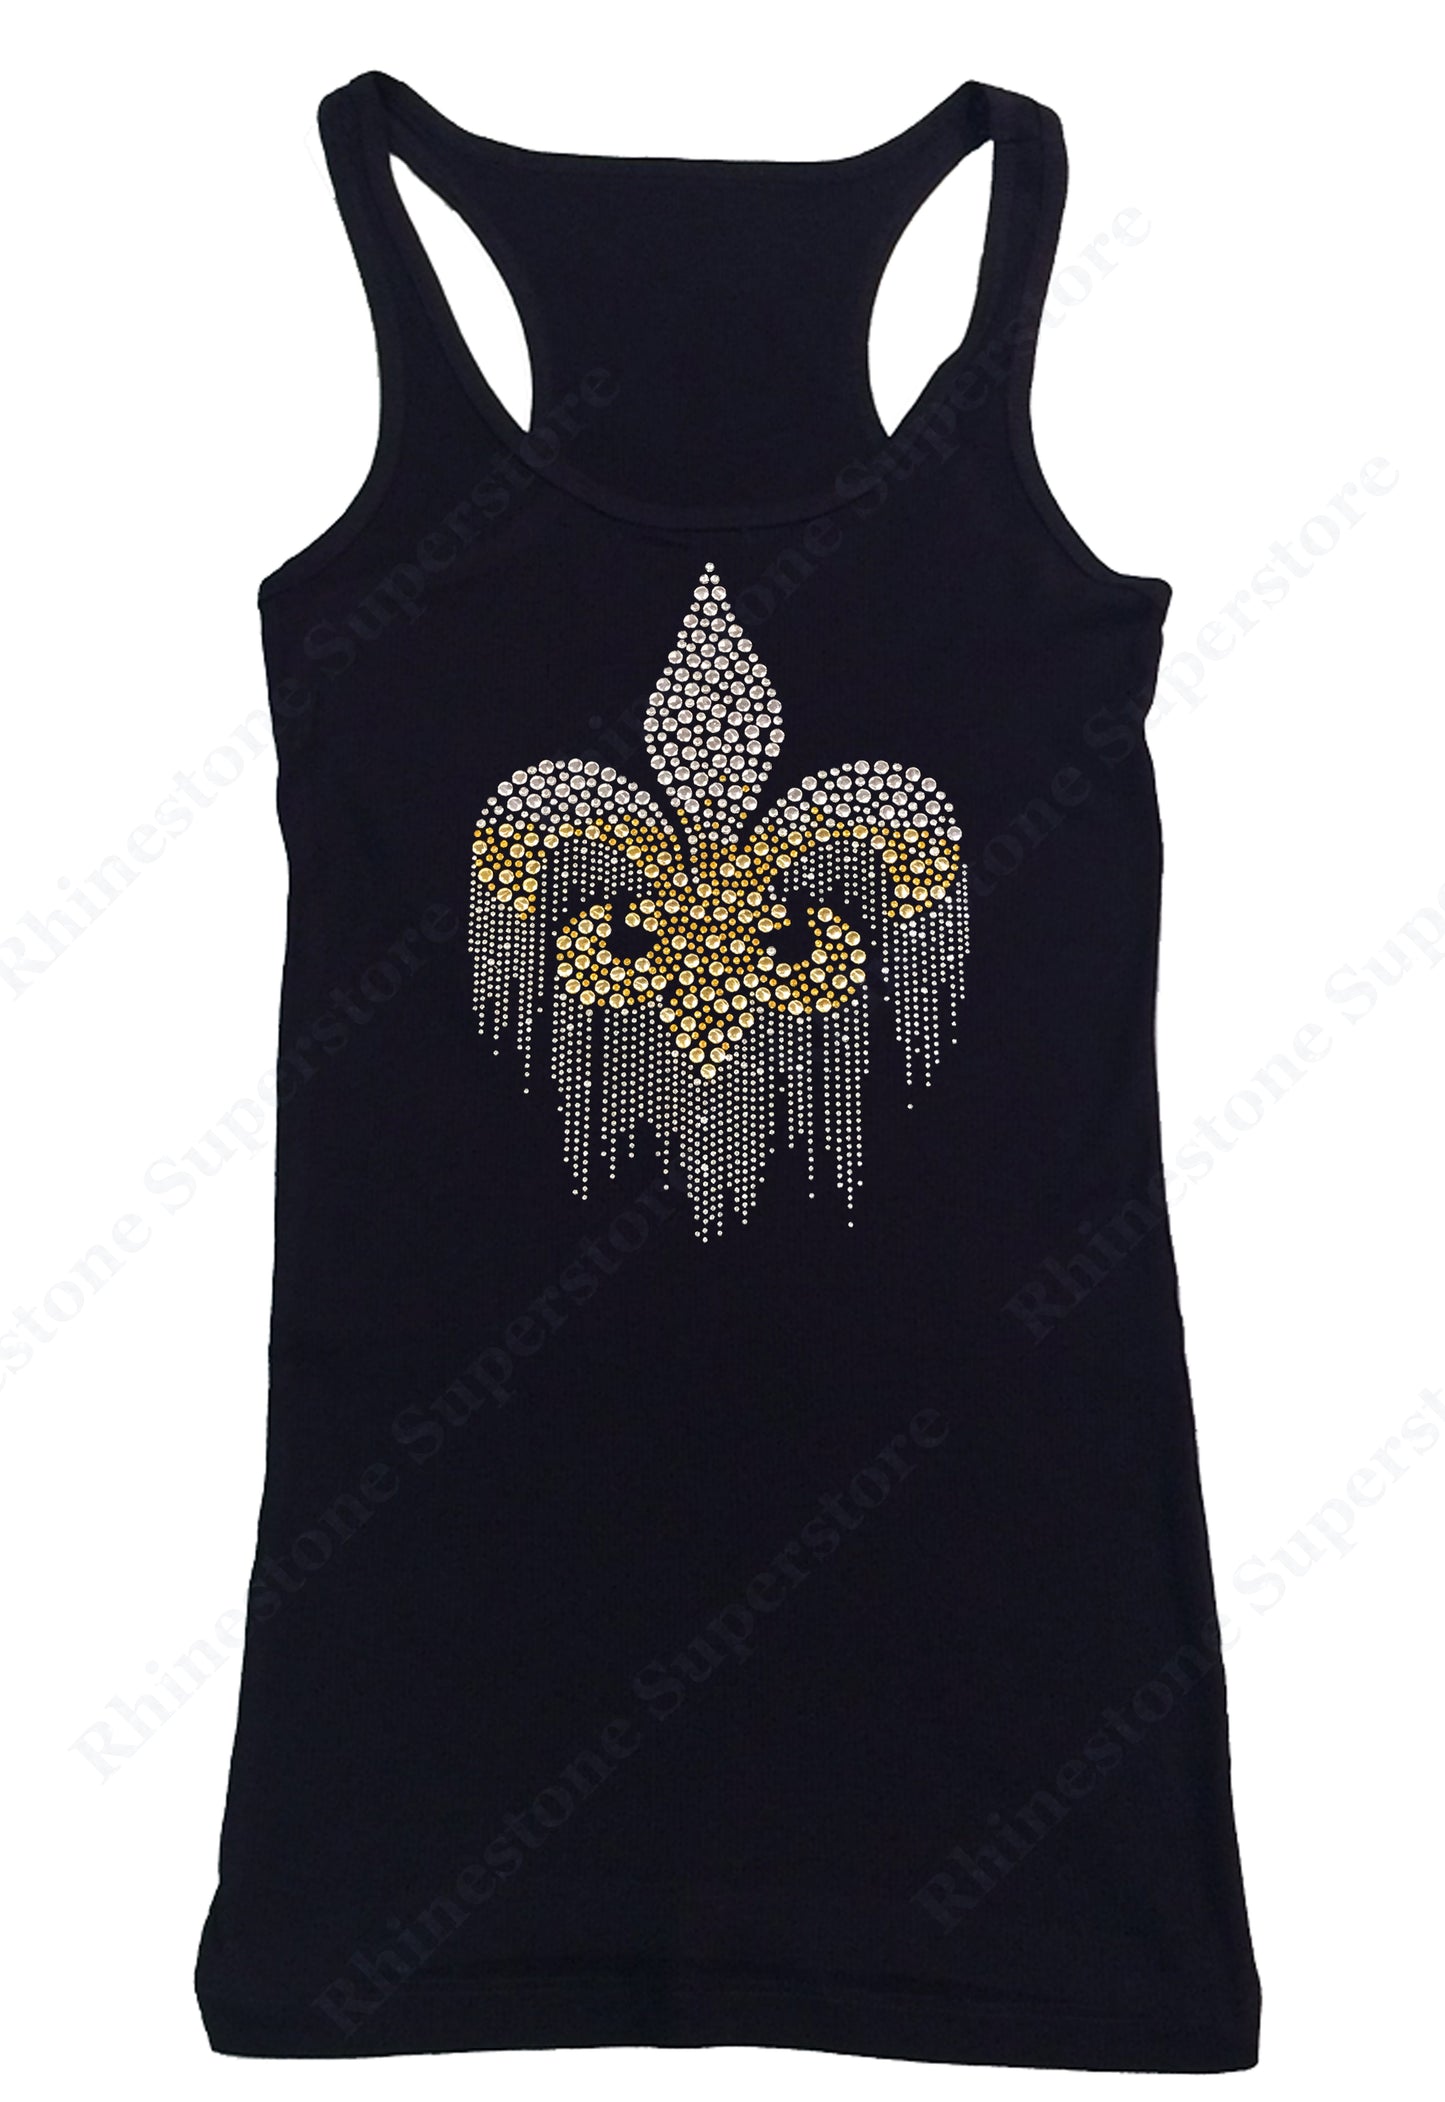 Womens T-shirt with Fluer de Lis Dripping in Silver and Gold Rhinestuds